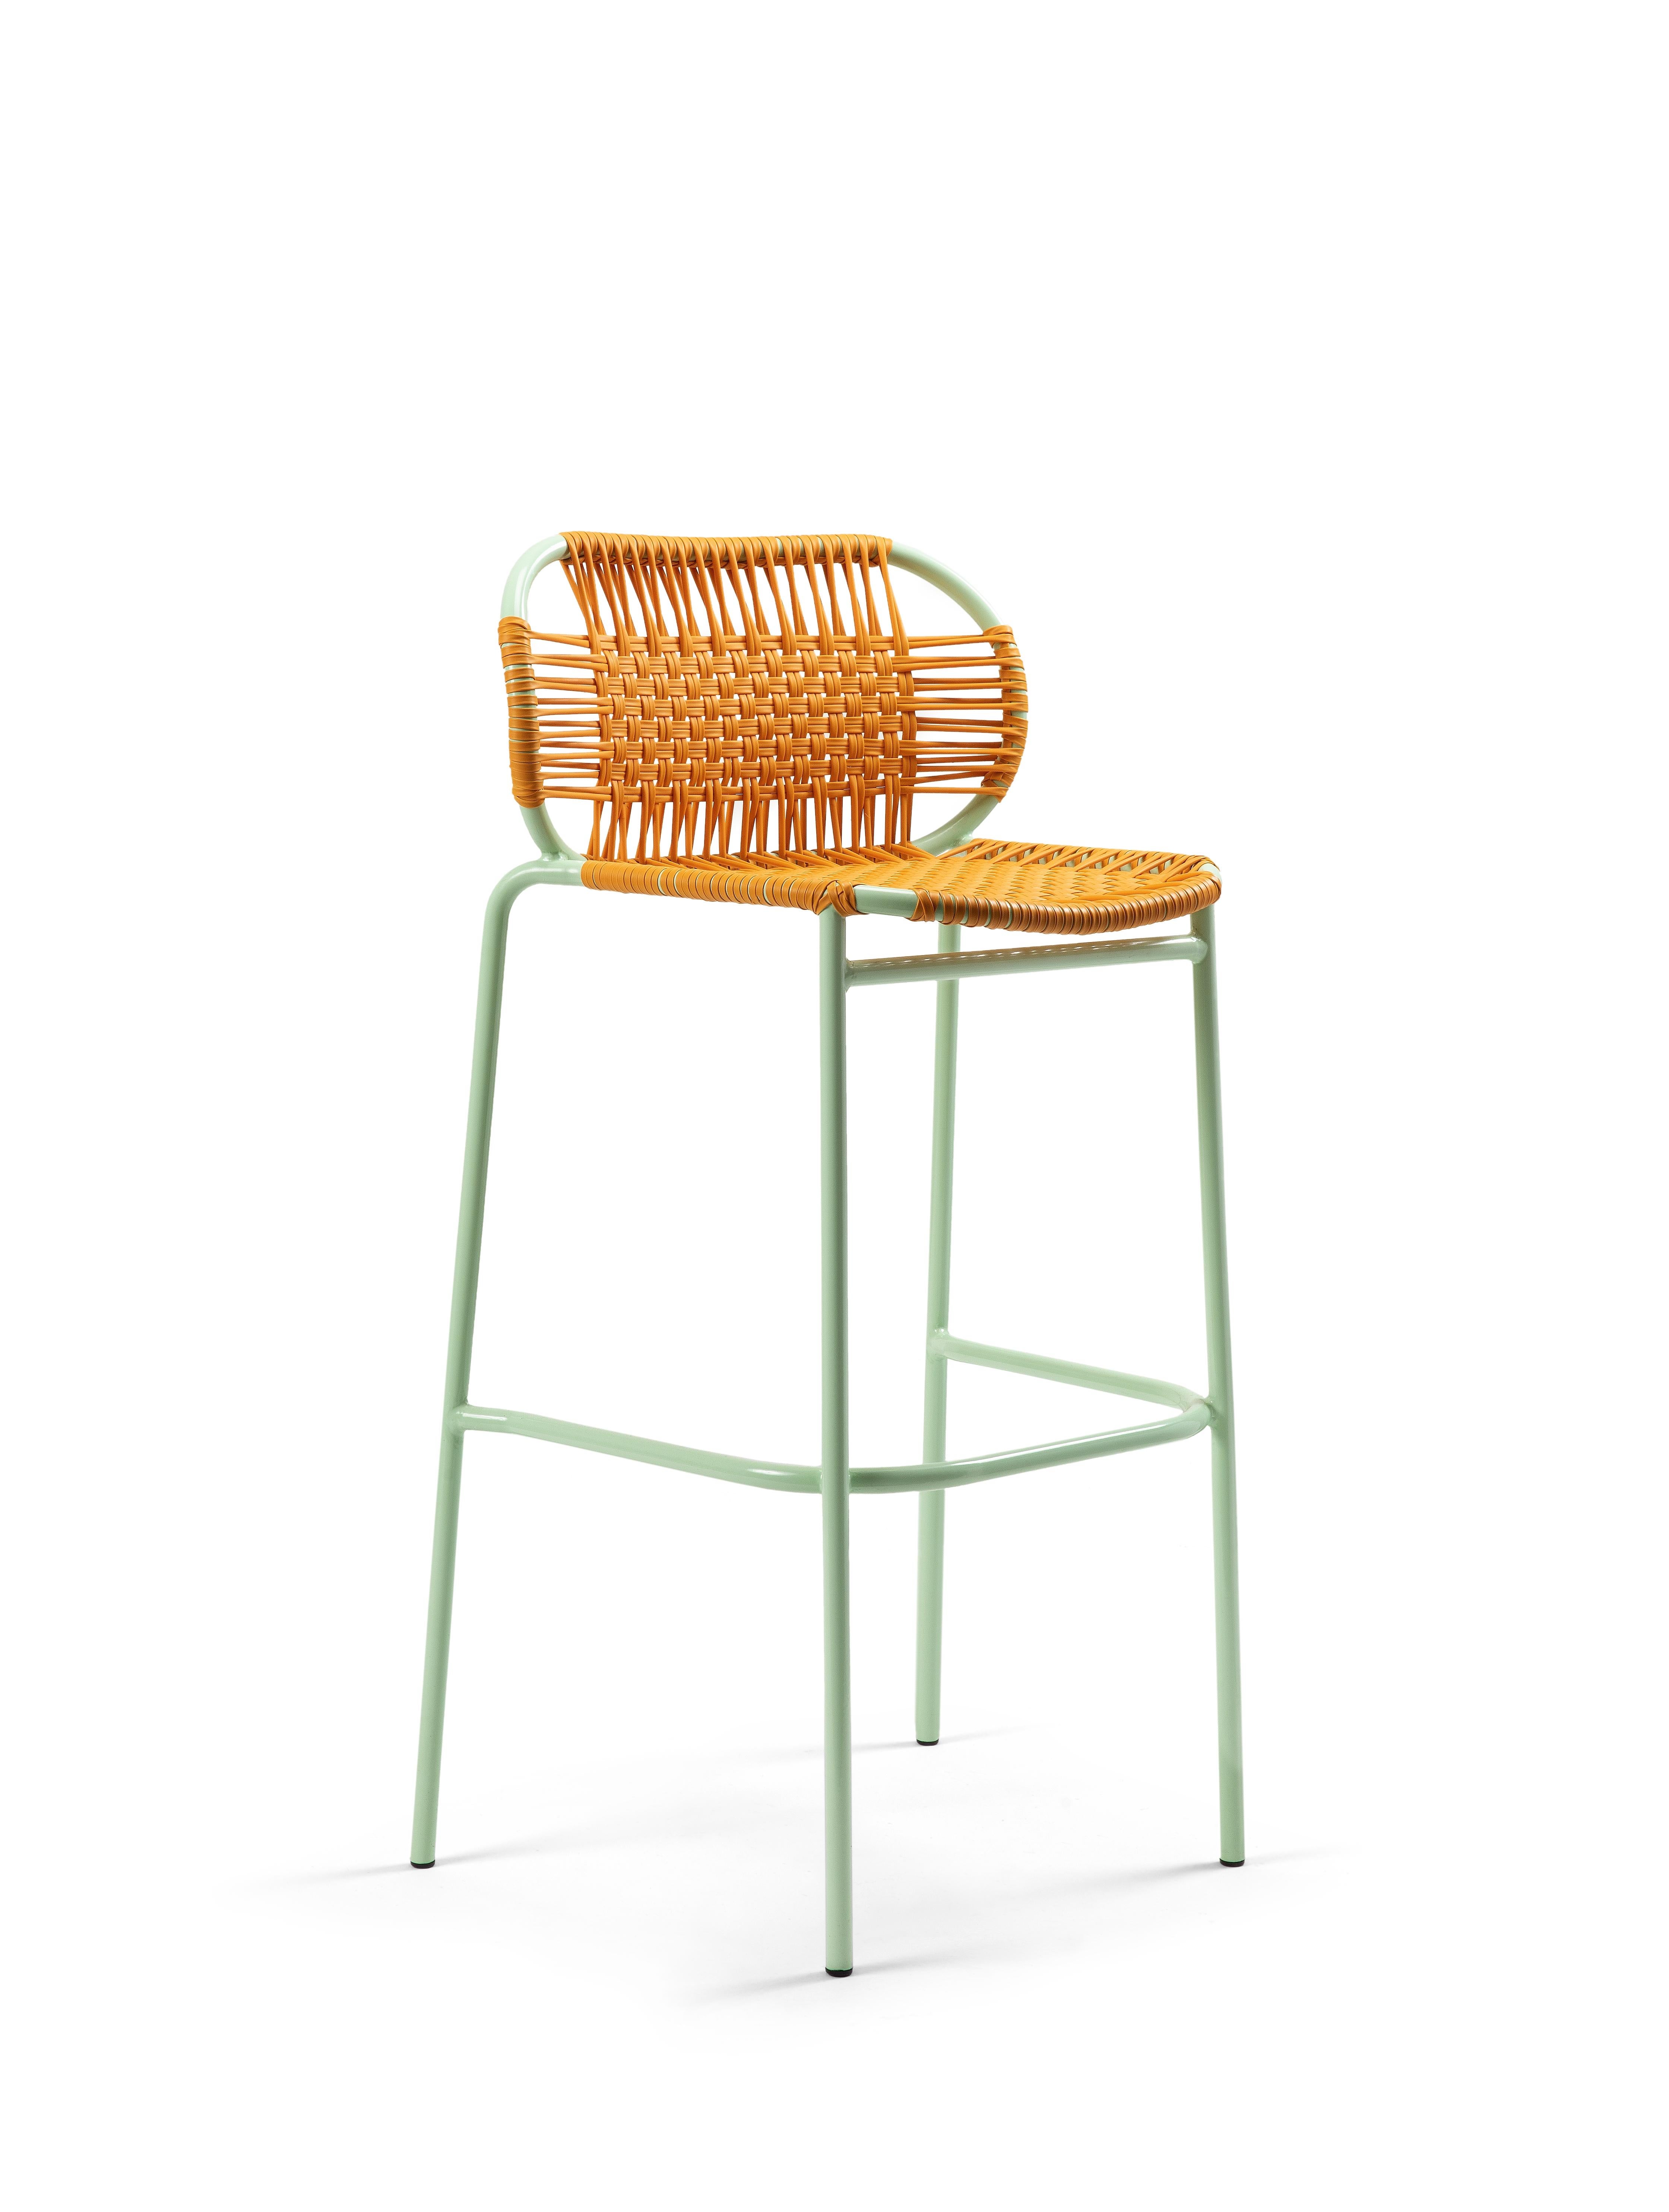 Honey Cielo bar stool by Sebastian Herkner
Materials: Galvanized and powder-coated tubular steel. PVC strings are made from recycled plastic.
Technique: Made from recycled plastic and weaved by local craftspeople in Cartagena, Colombia.